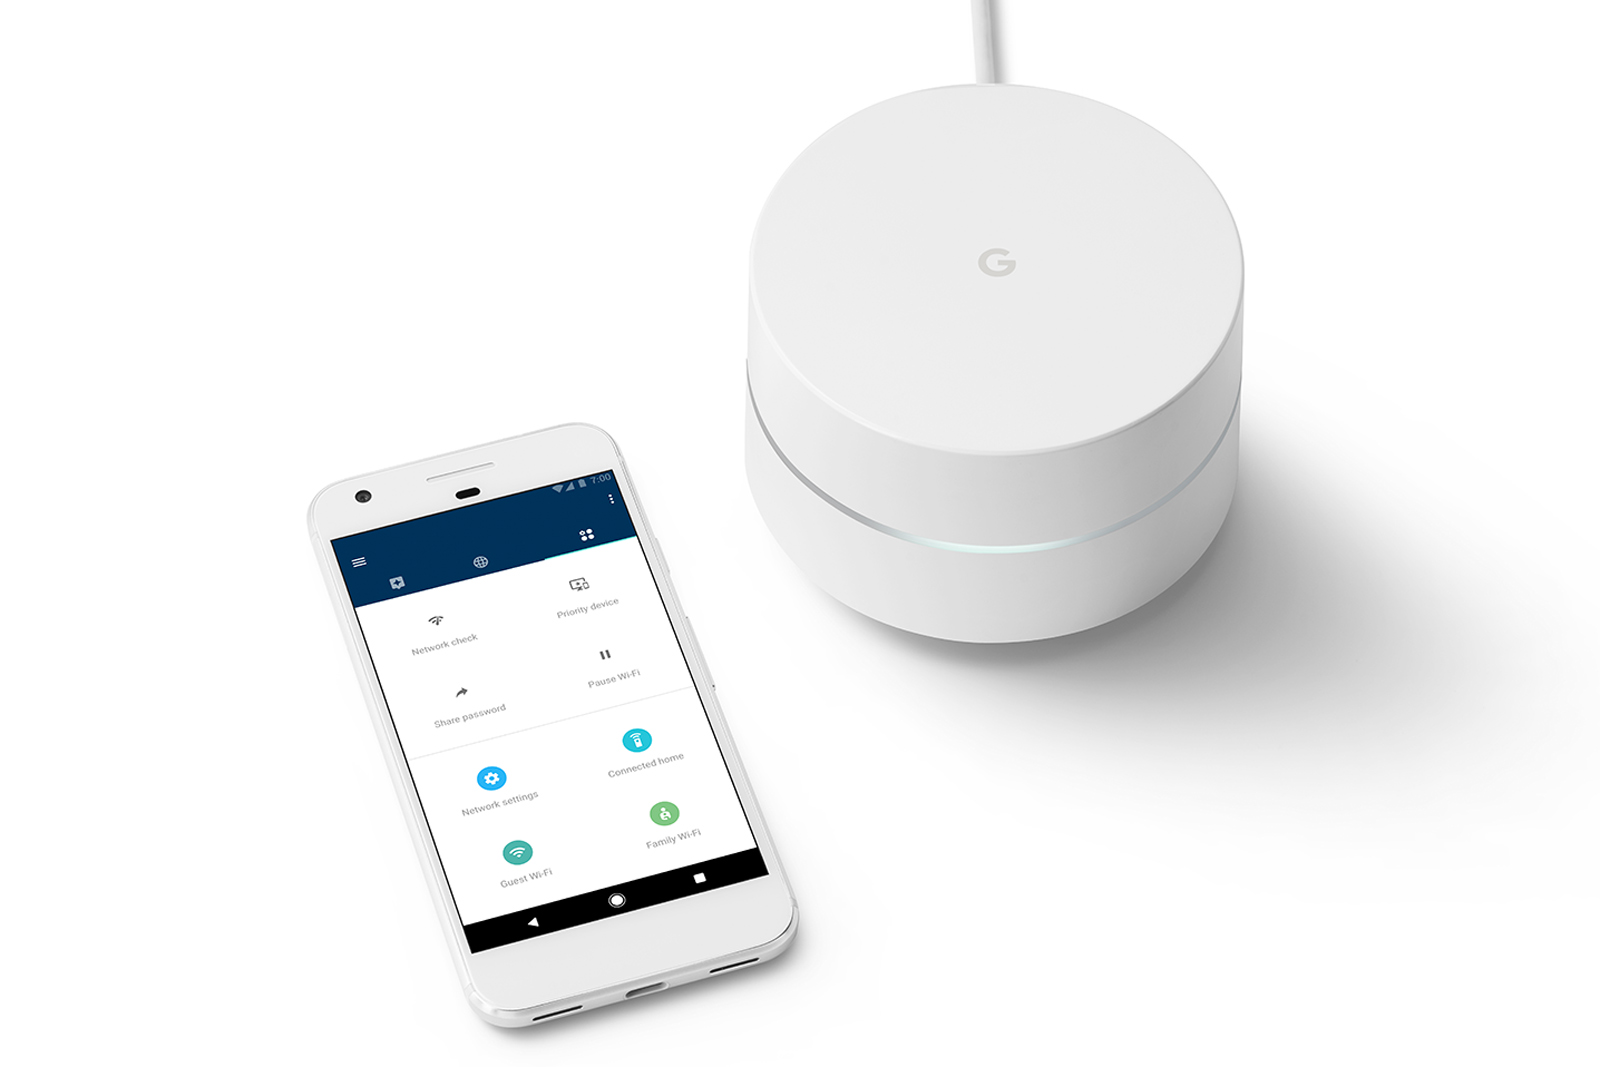 Google WiFi is a router that simplifies whole-home wireless